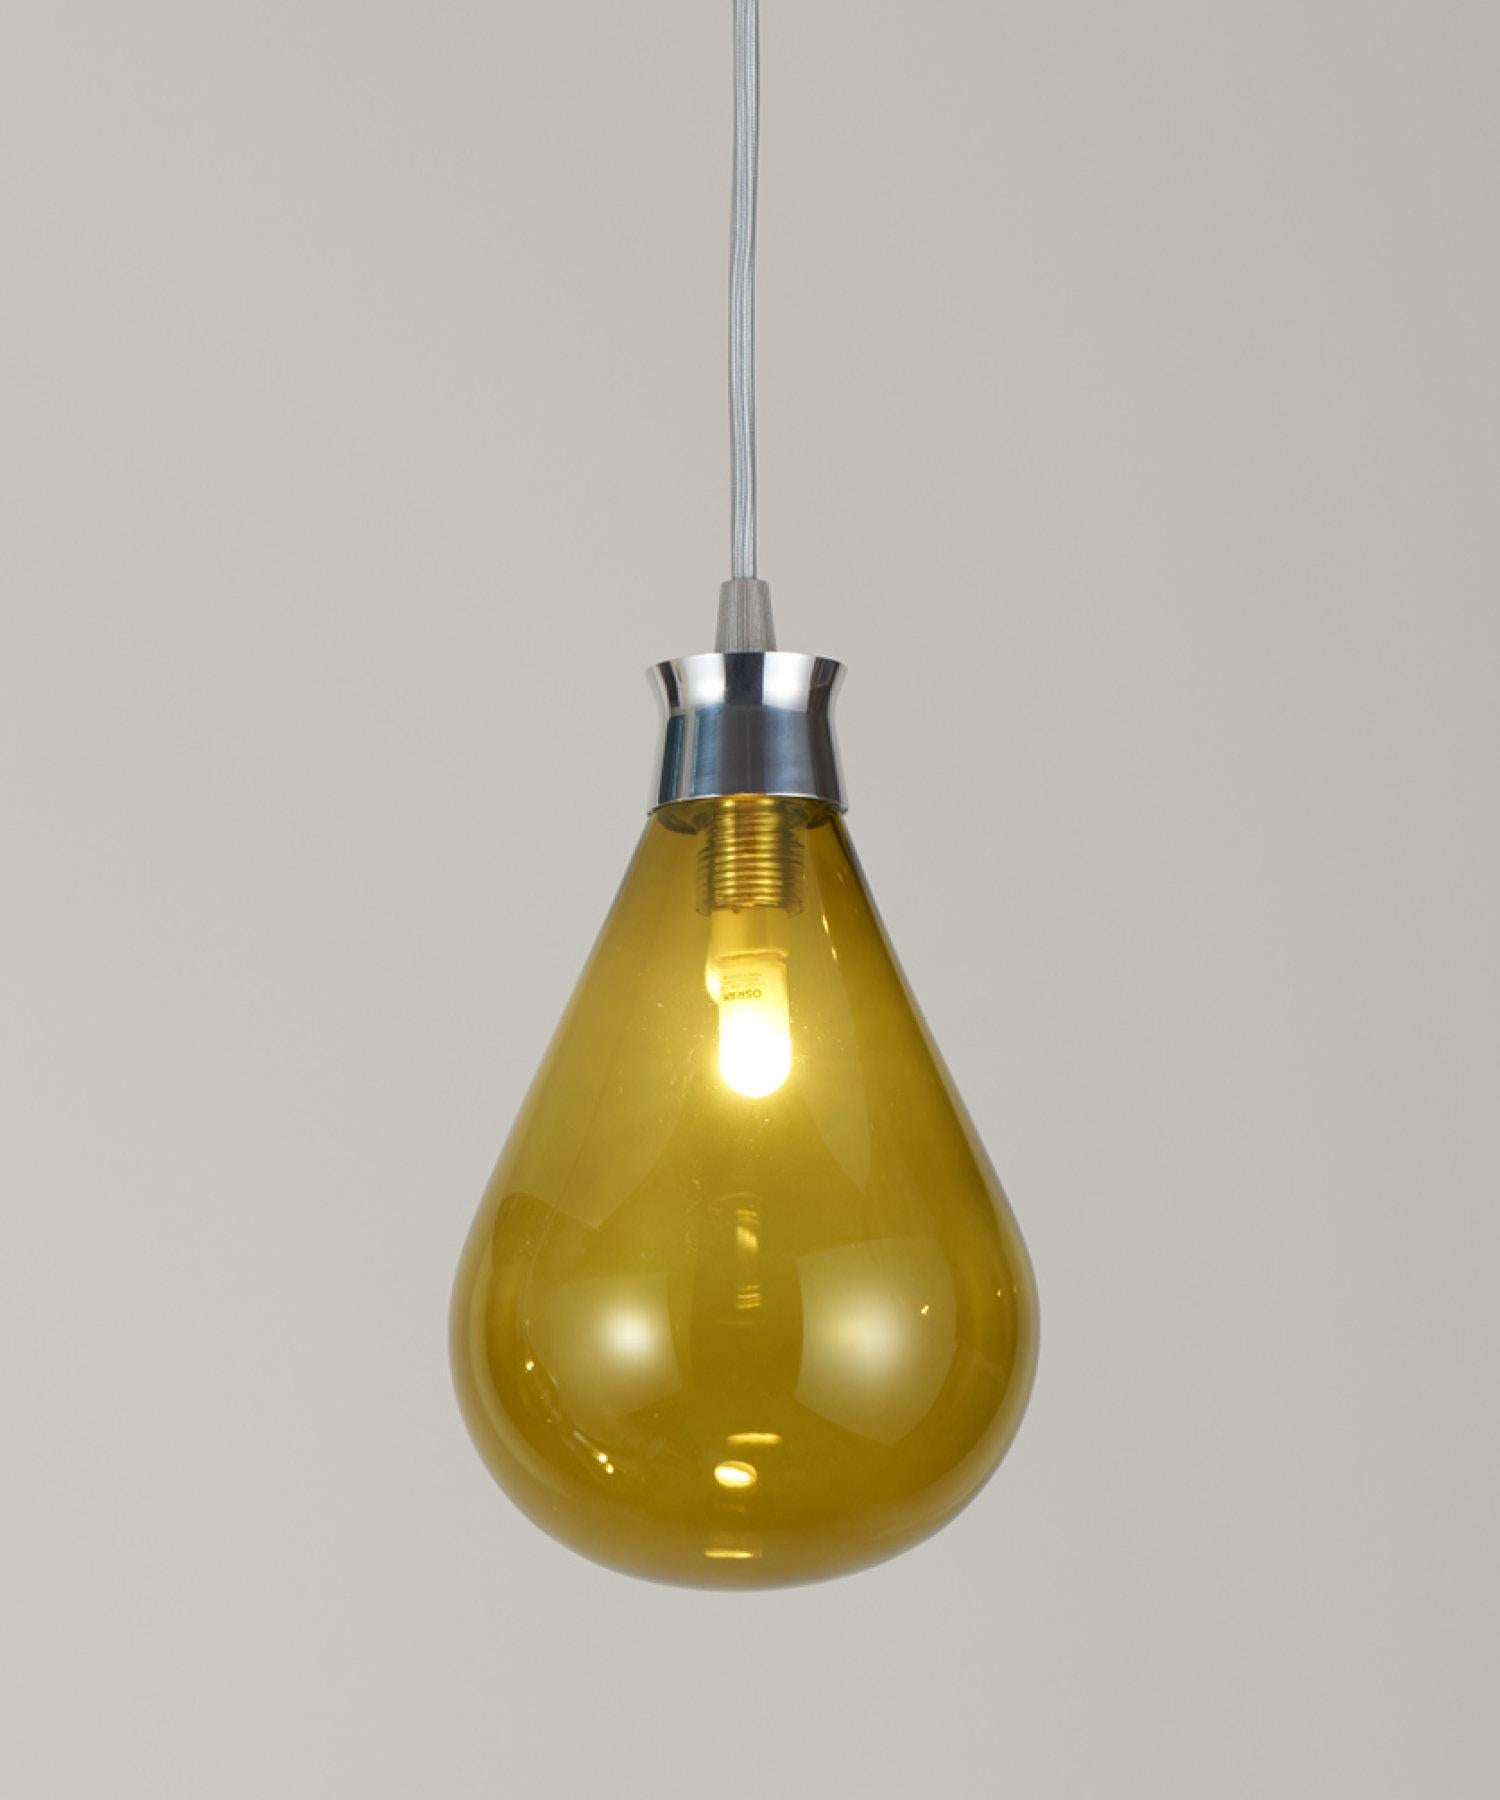 The Cintola Pendant works beautifully as a feature light for kitchens, bedrooms or living spaces. The handblown glass diffusers are available in a range of seven eye-catching colours, whilst the anodised-aluminium body keeps the overall aesthetic